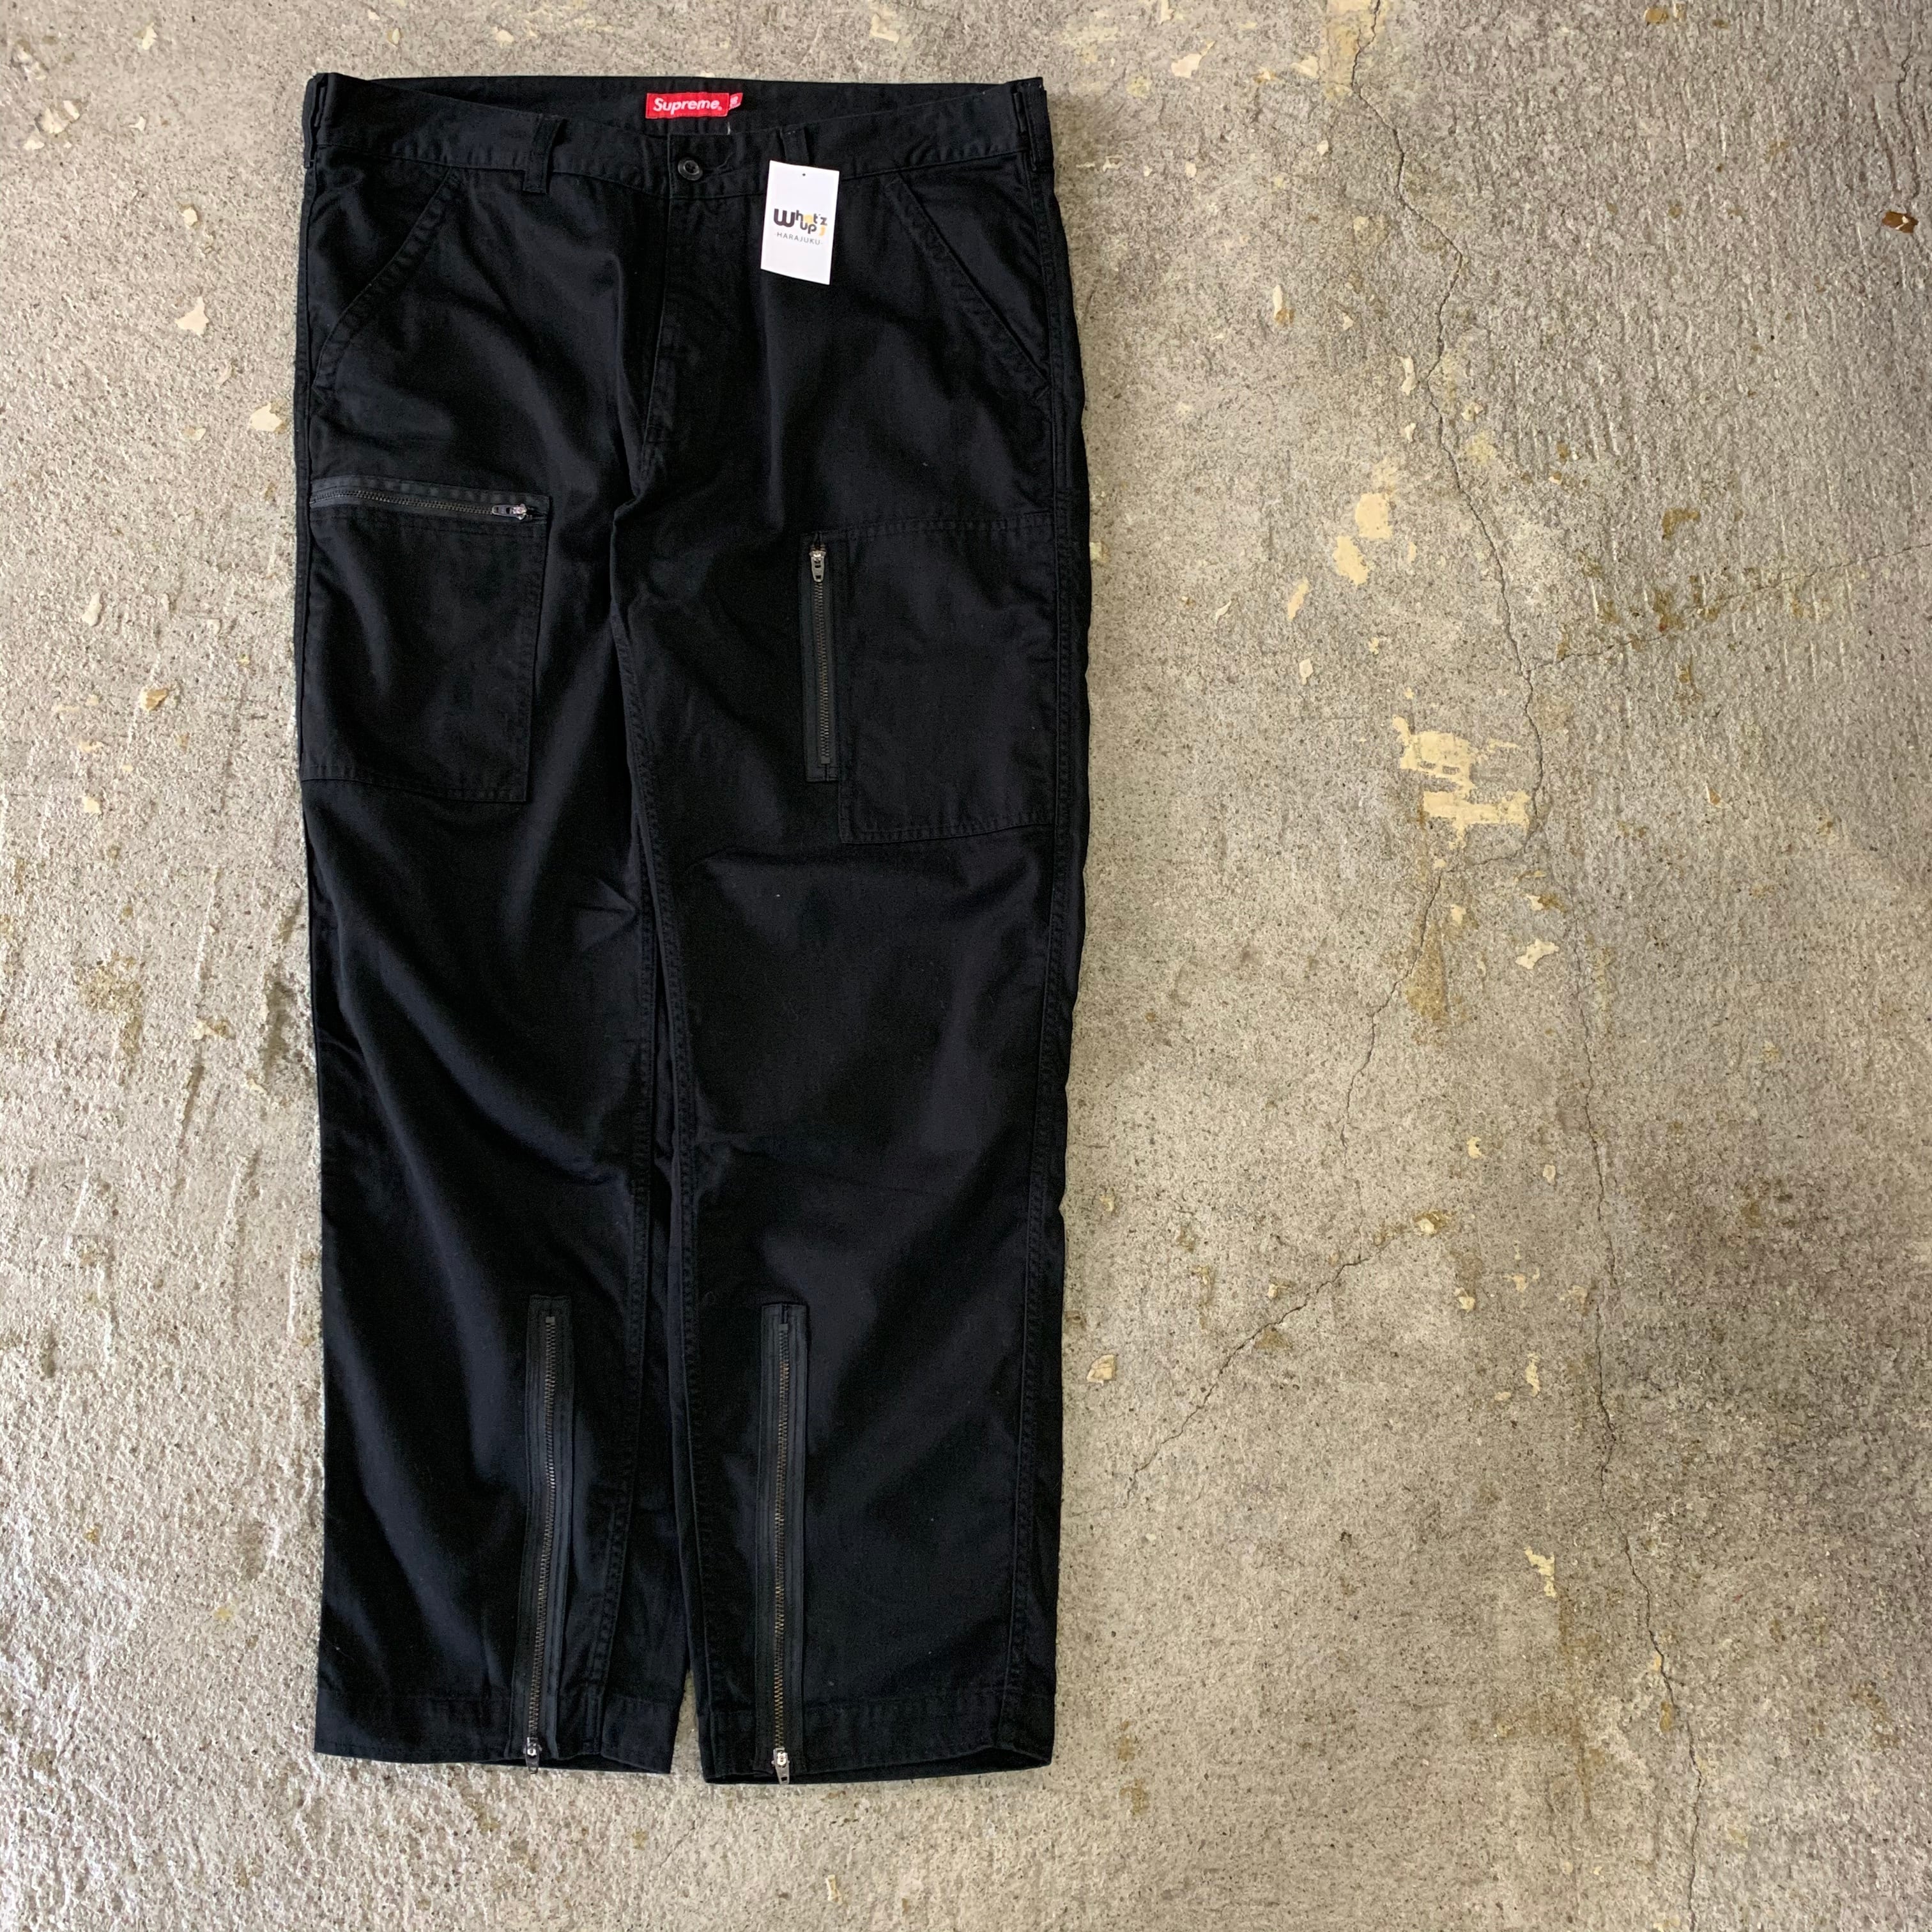 2013aw SUPREME flight pants | What’z up powered by BASE